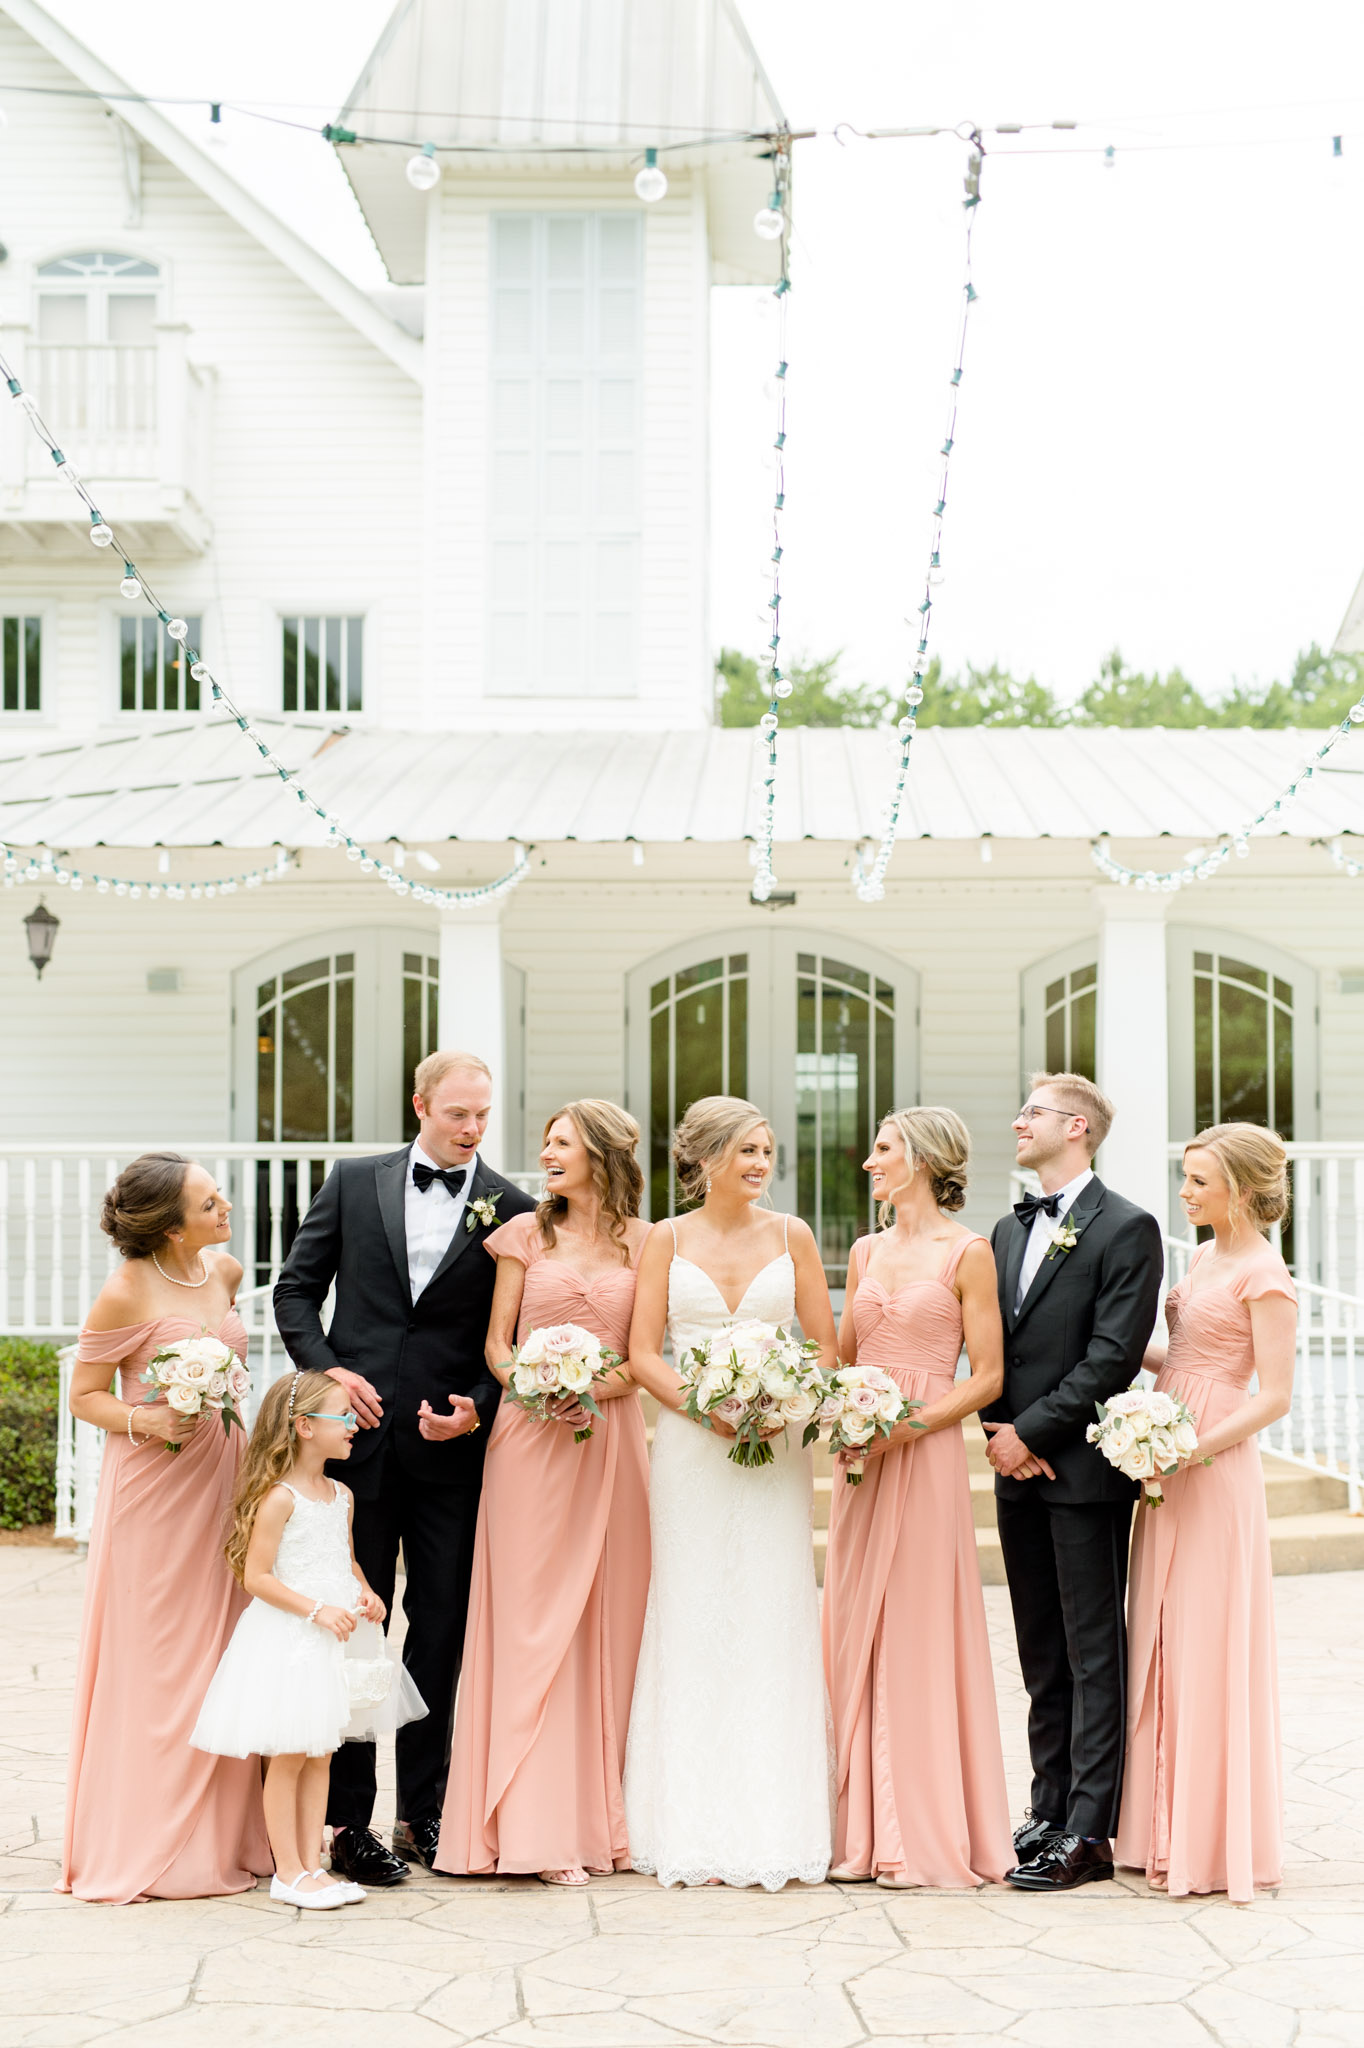 Bridal party laughs together.